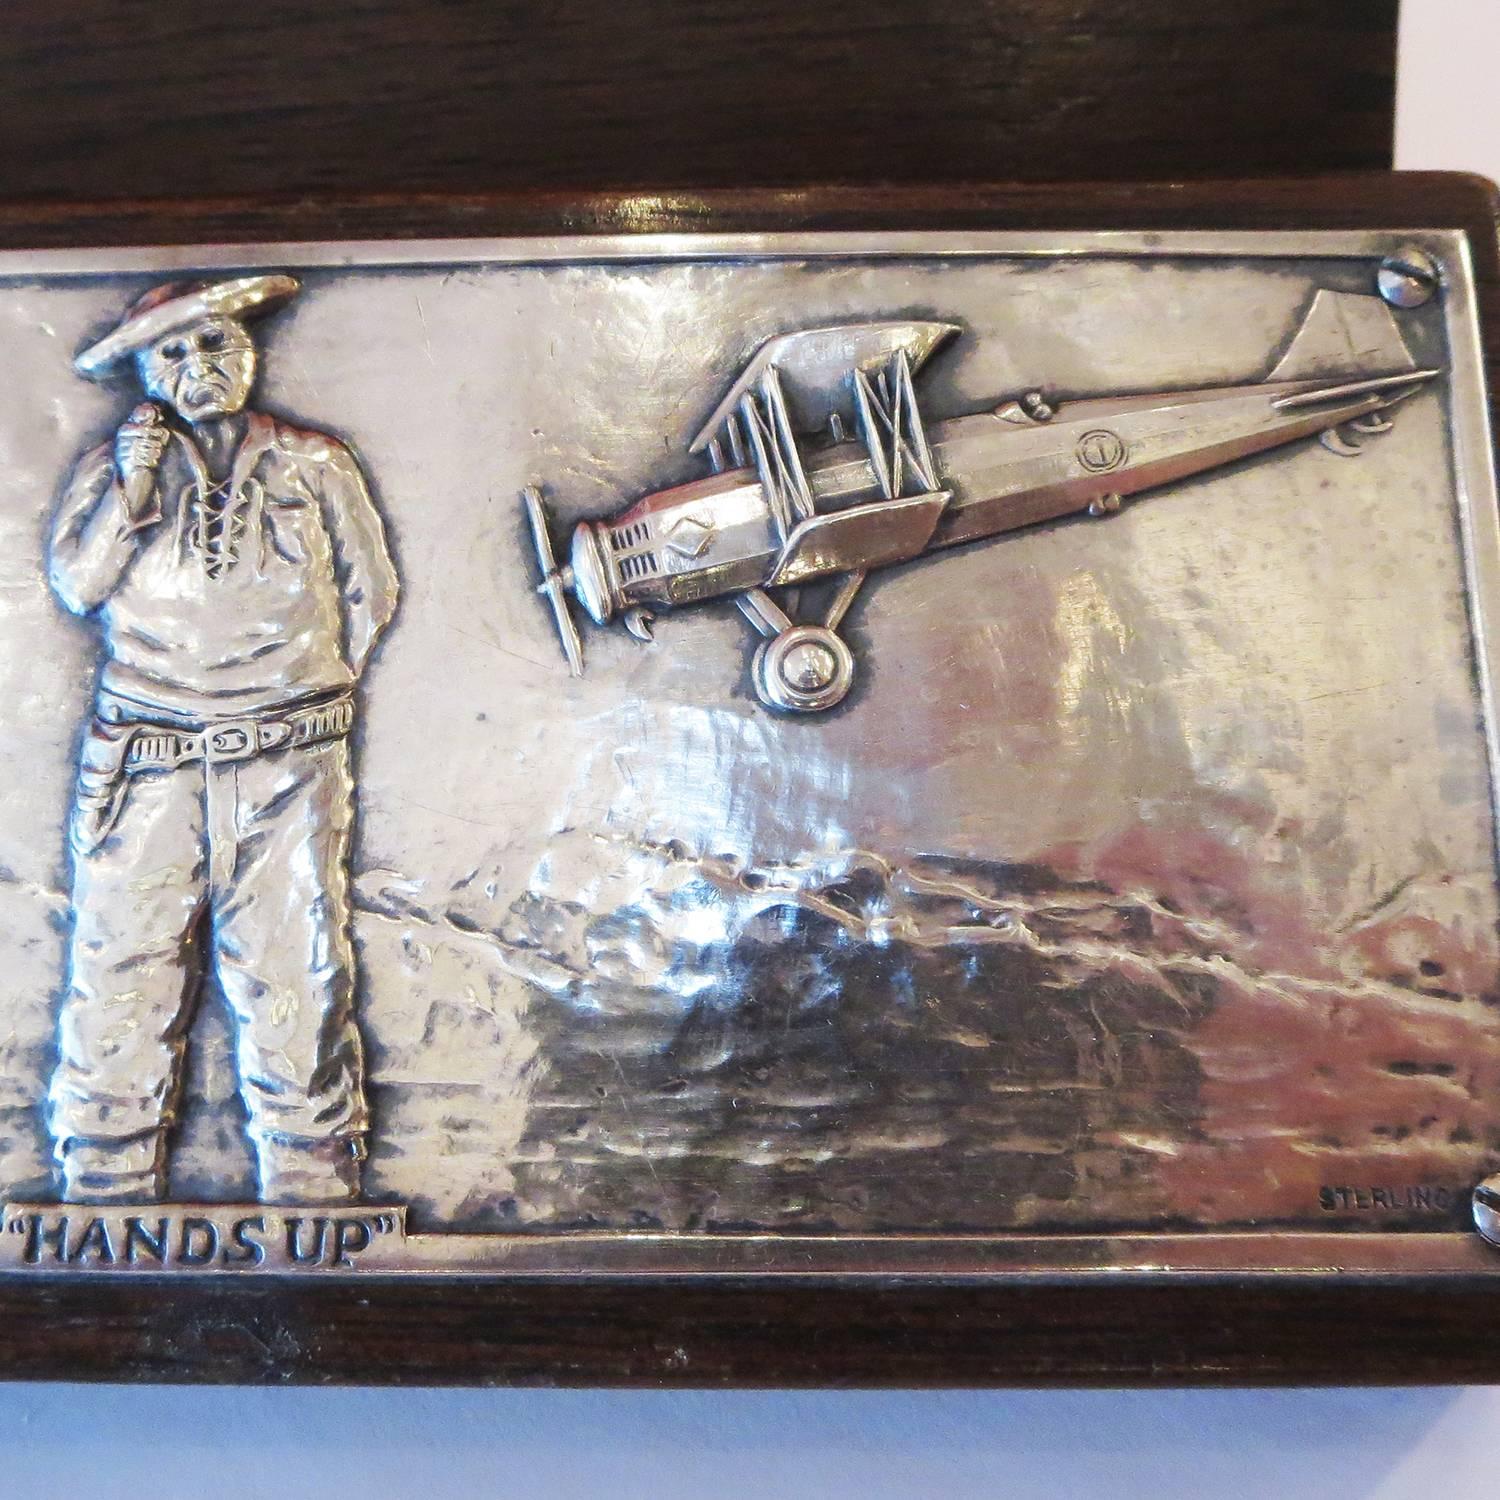 American Early 20th Century Pinkerton Detective Agency Desk Set